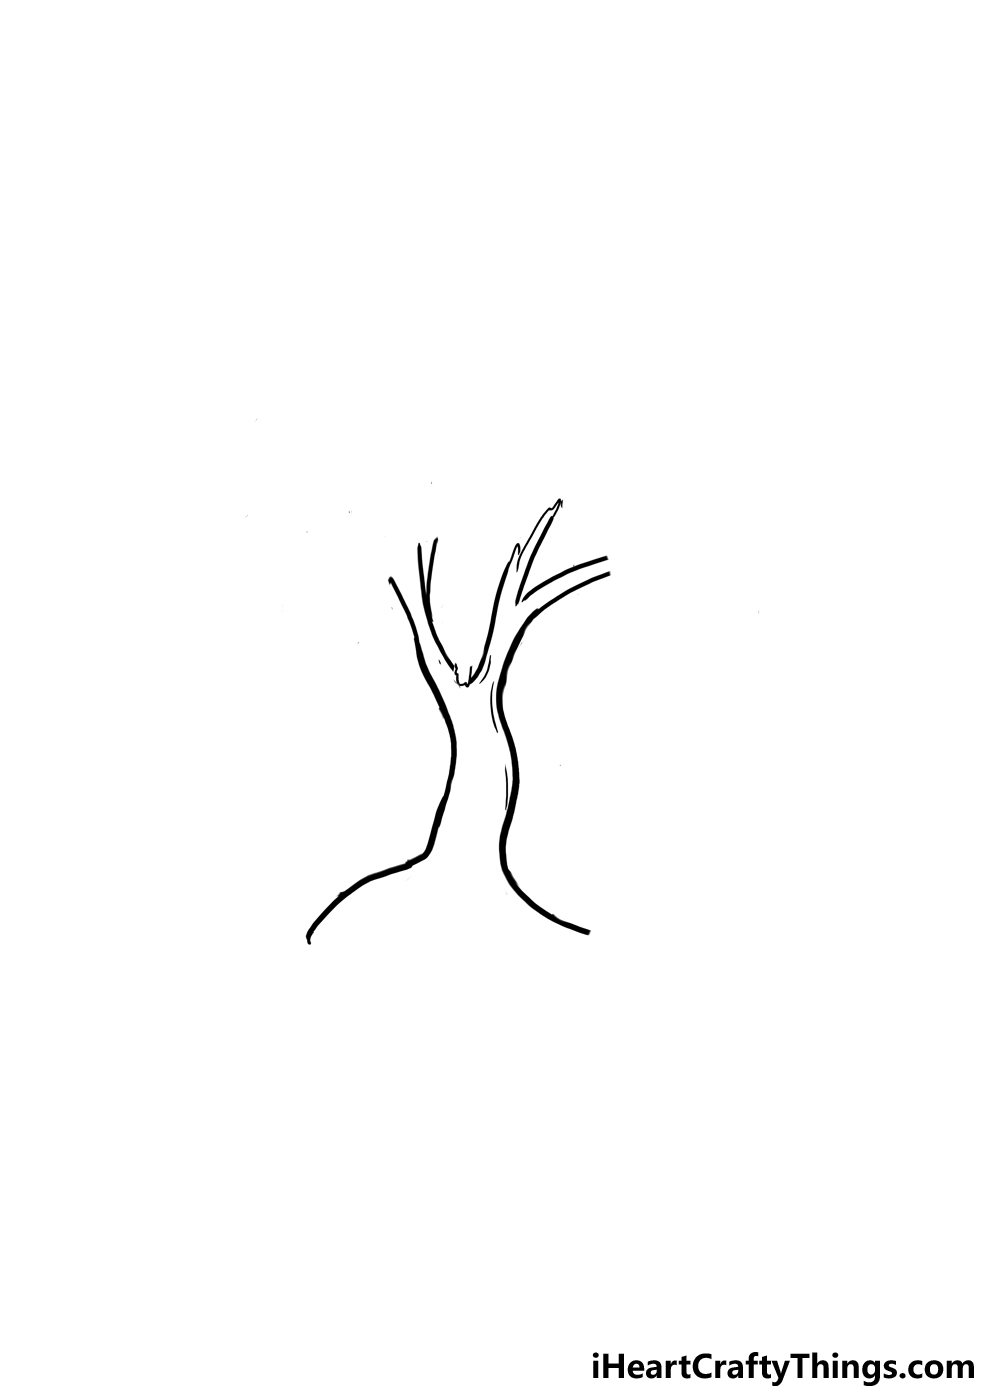 How to Draw A Willow Tree step 2